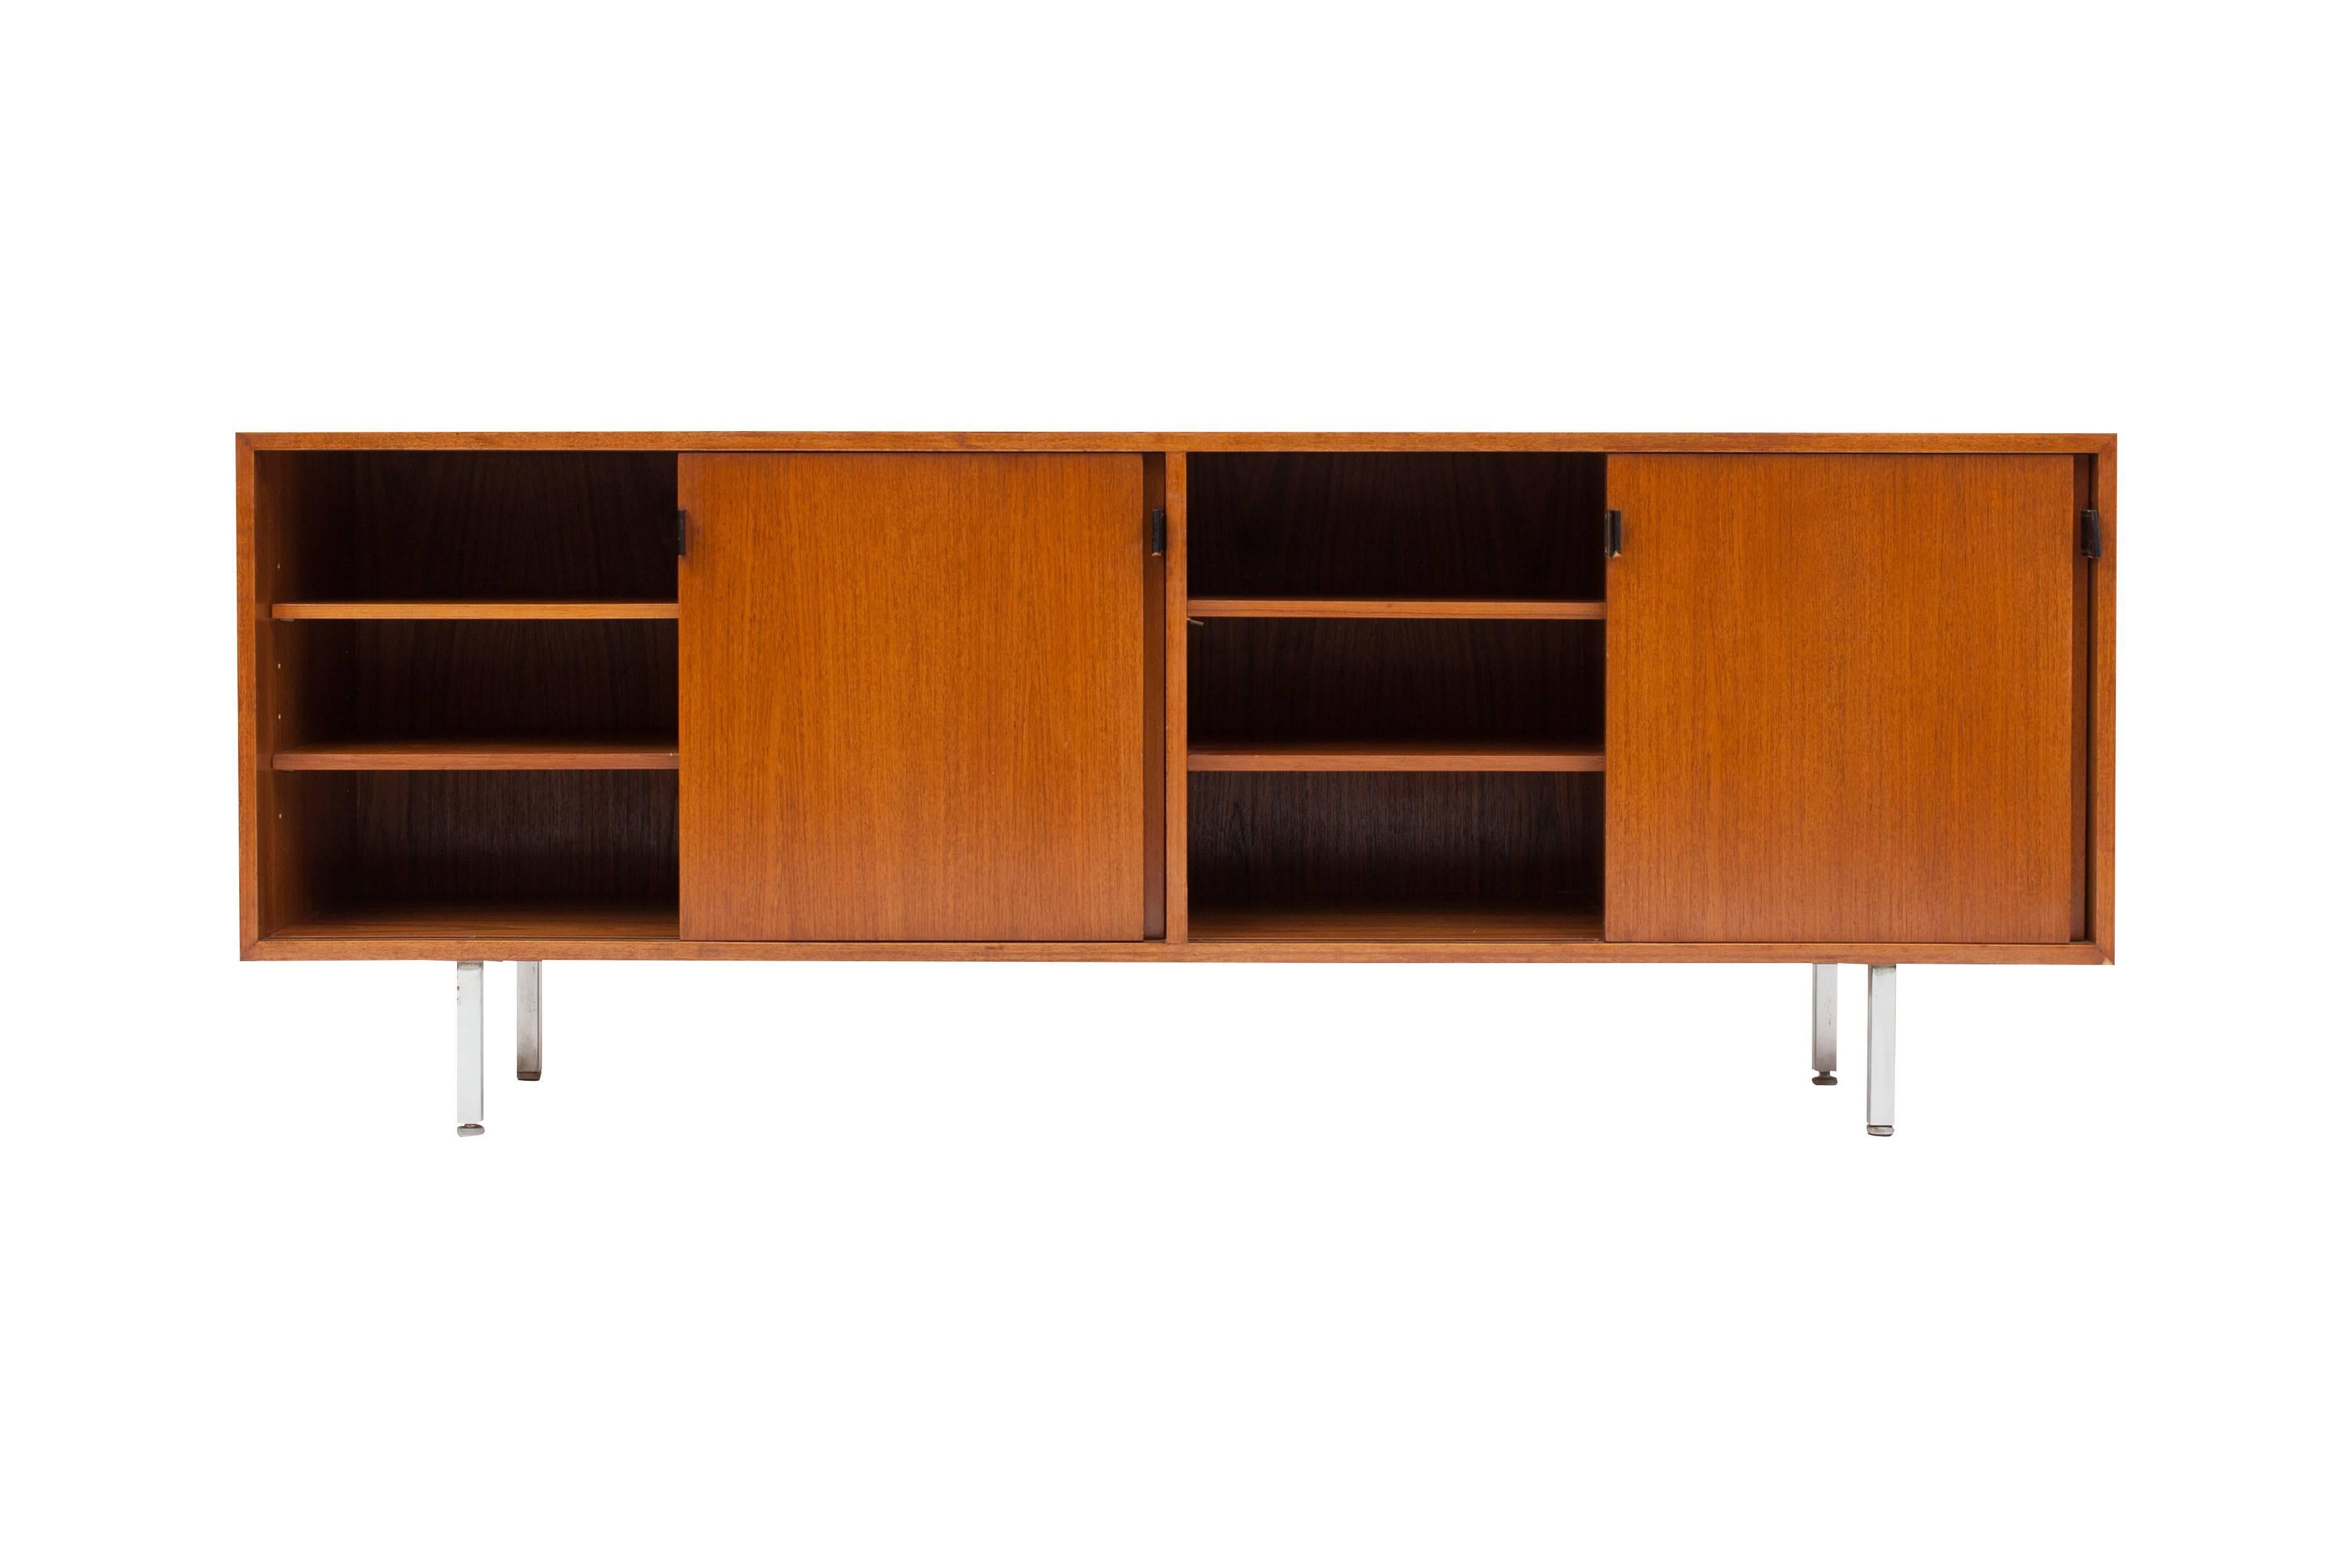 Mid-Century Modern Florence Knoll Credenza in Teak , Manufactured by De Coene, 1950s